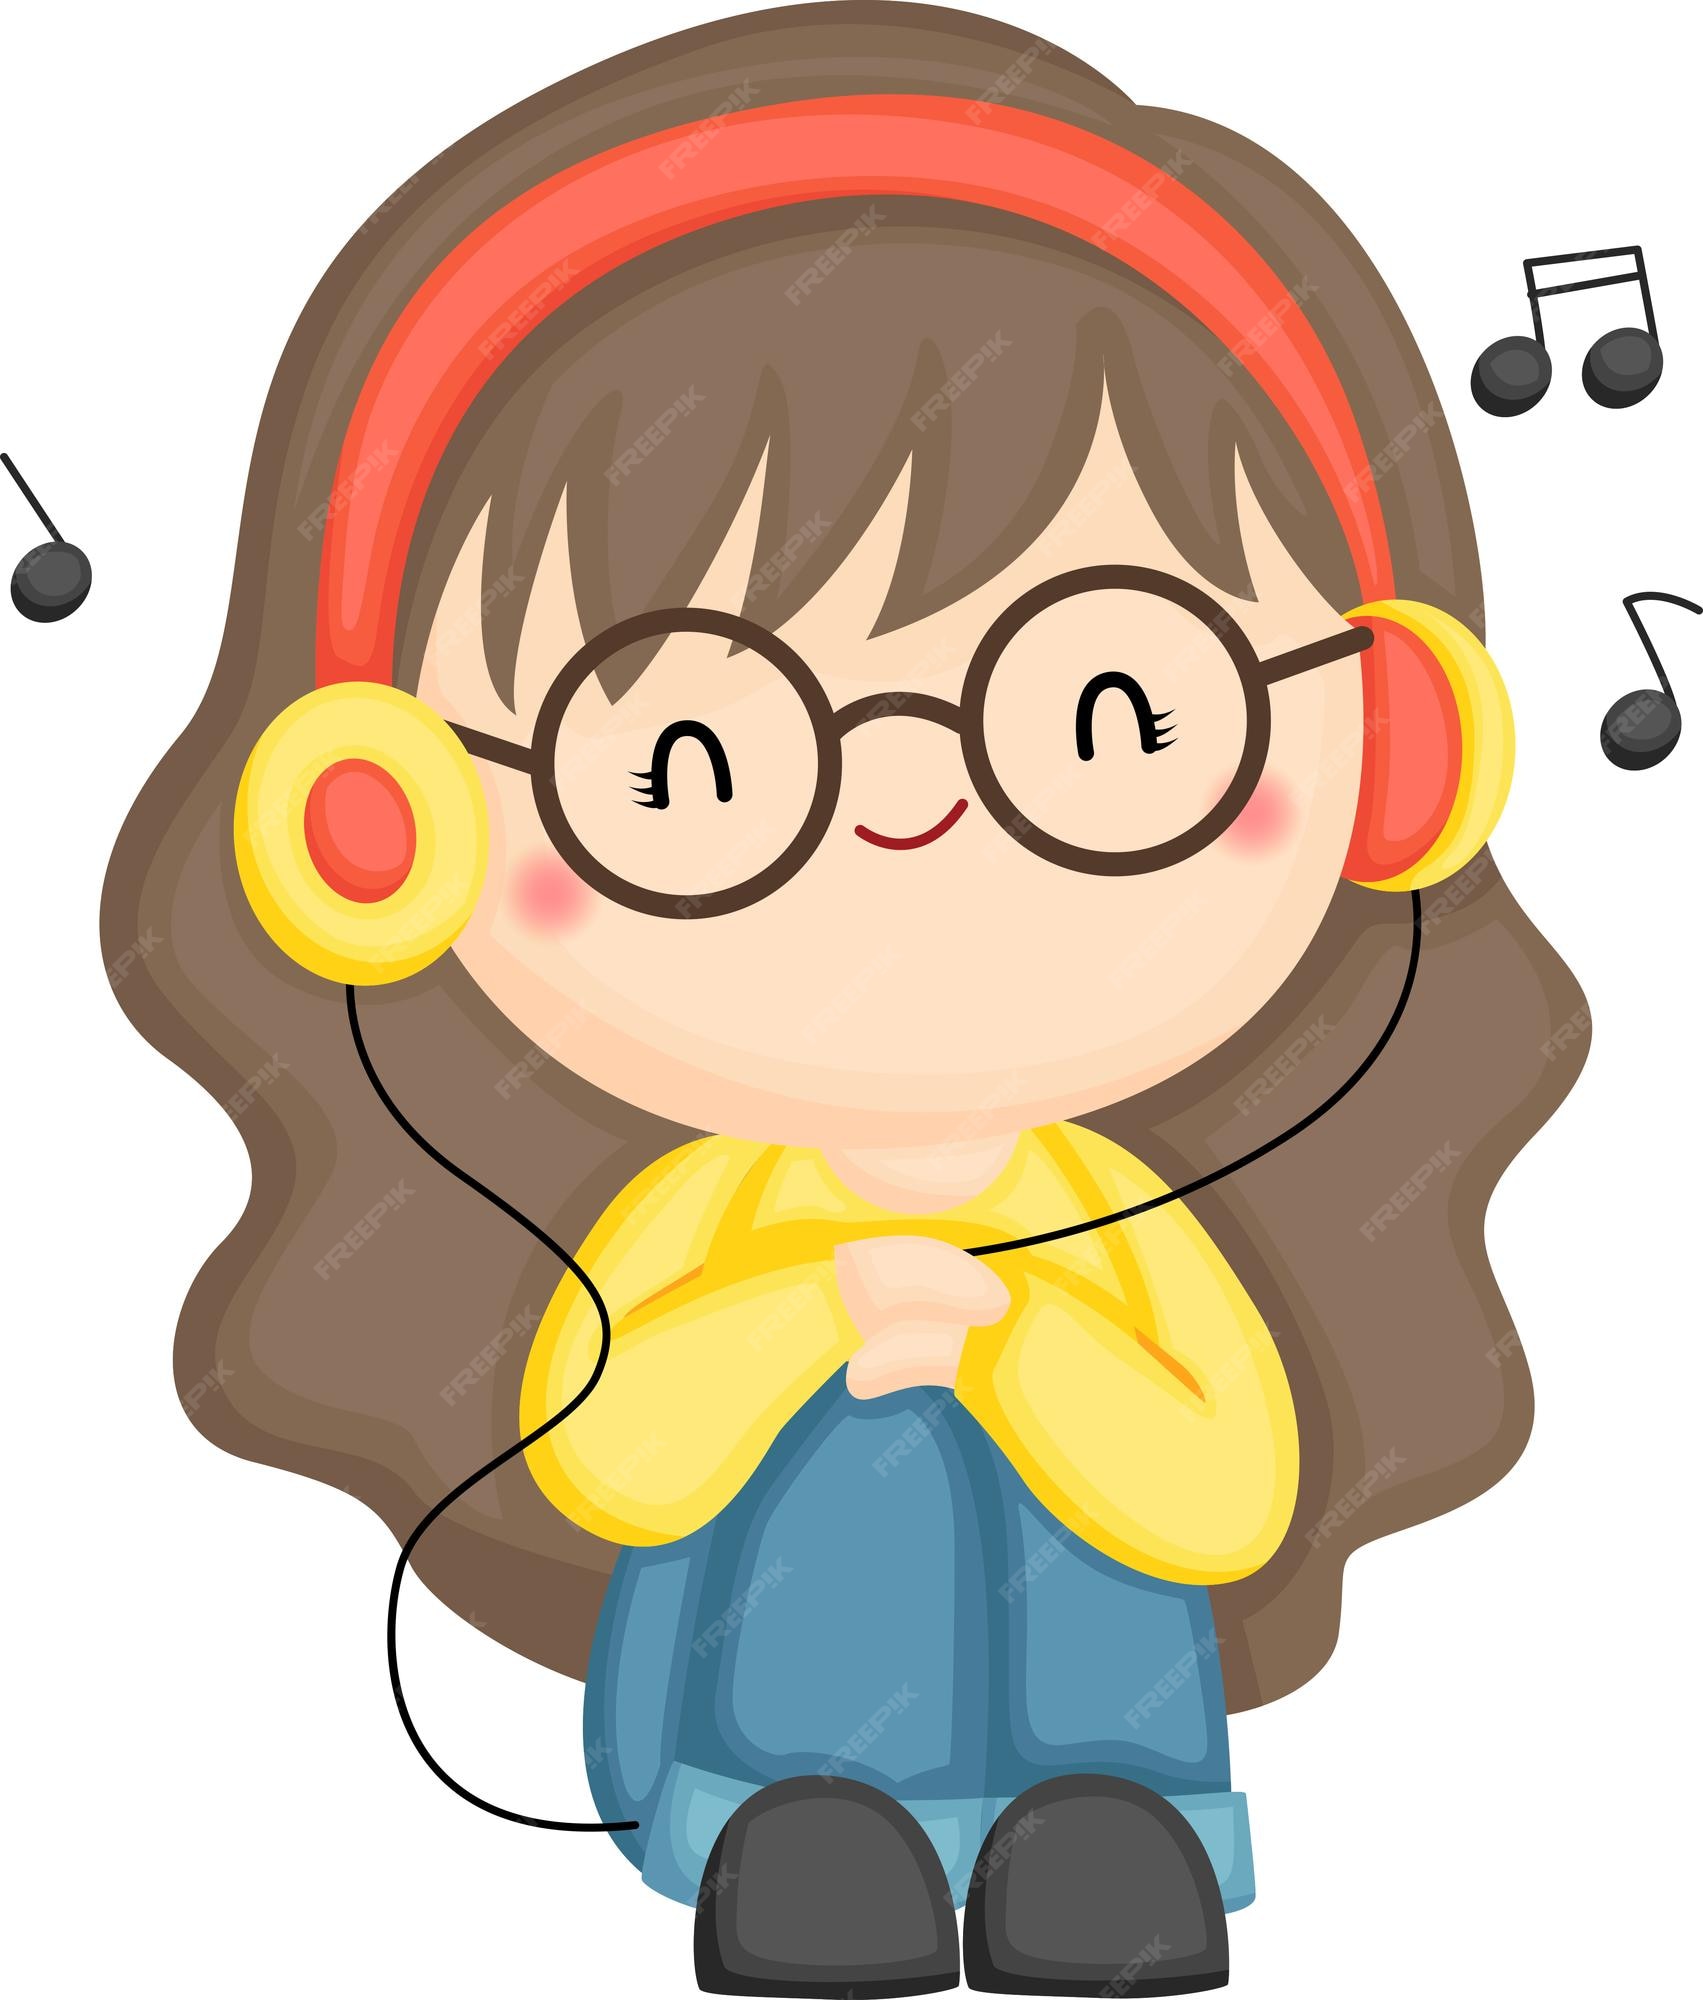 Premium Vector A Vector Of A Girl Listening To Music Using A Headphone